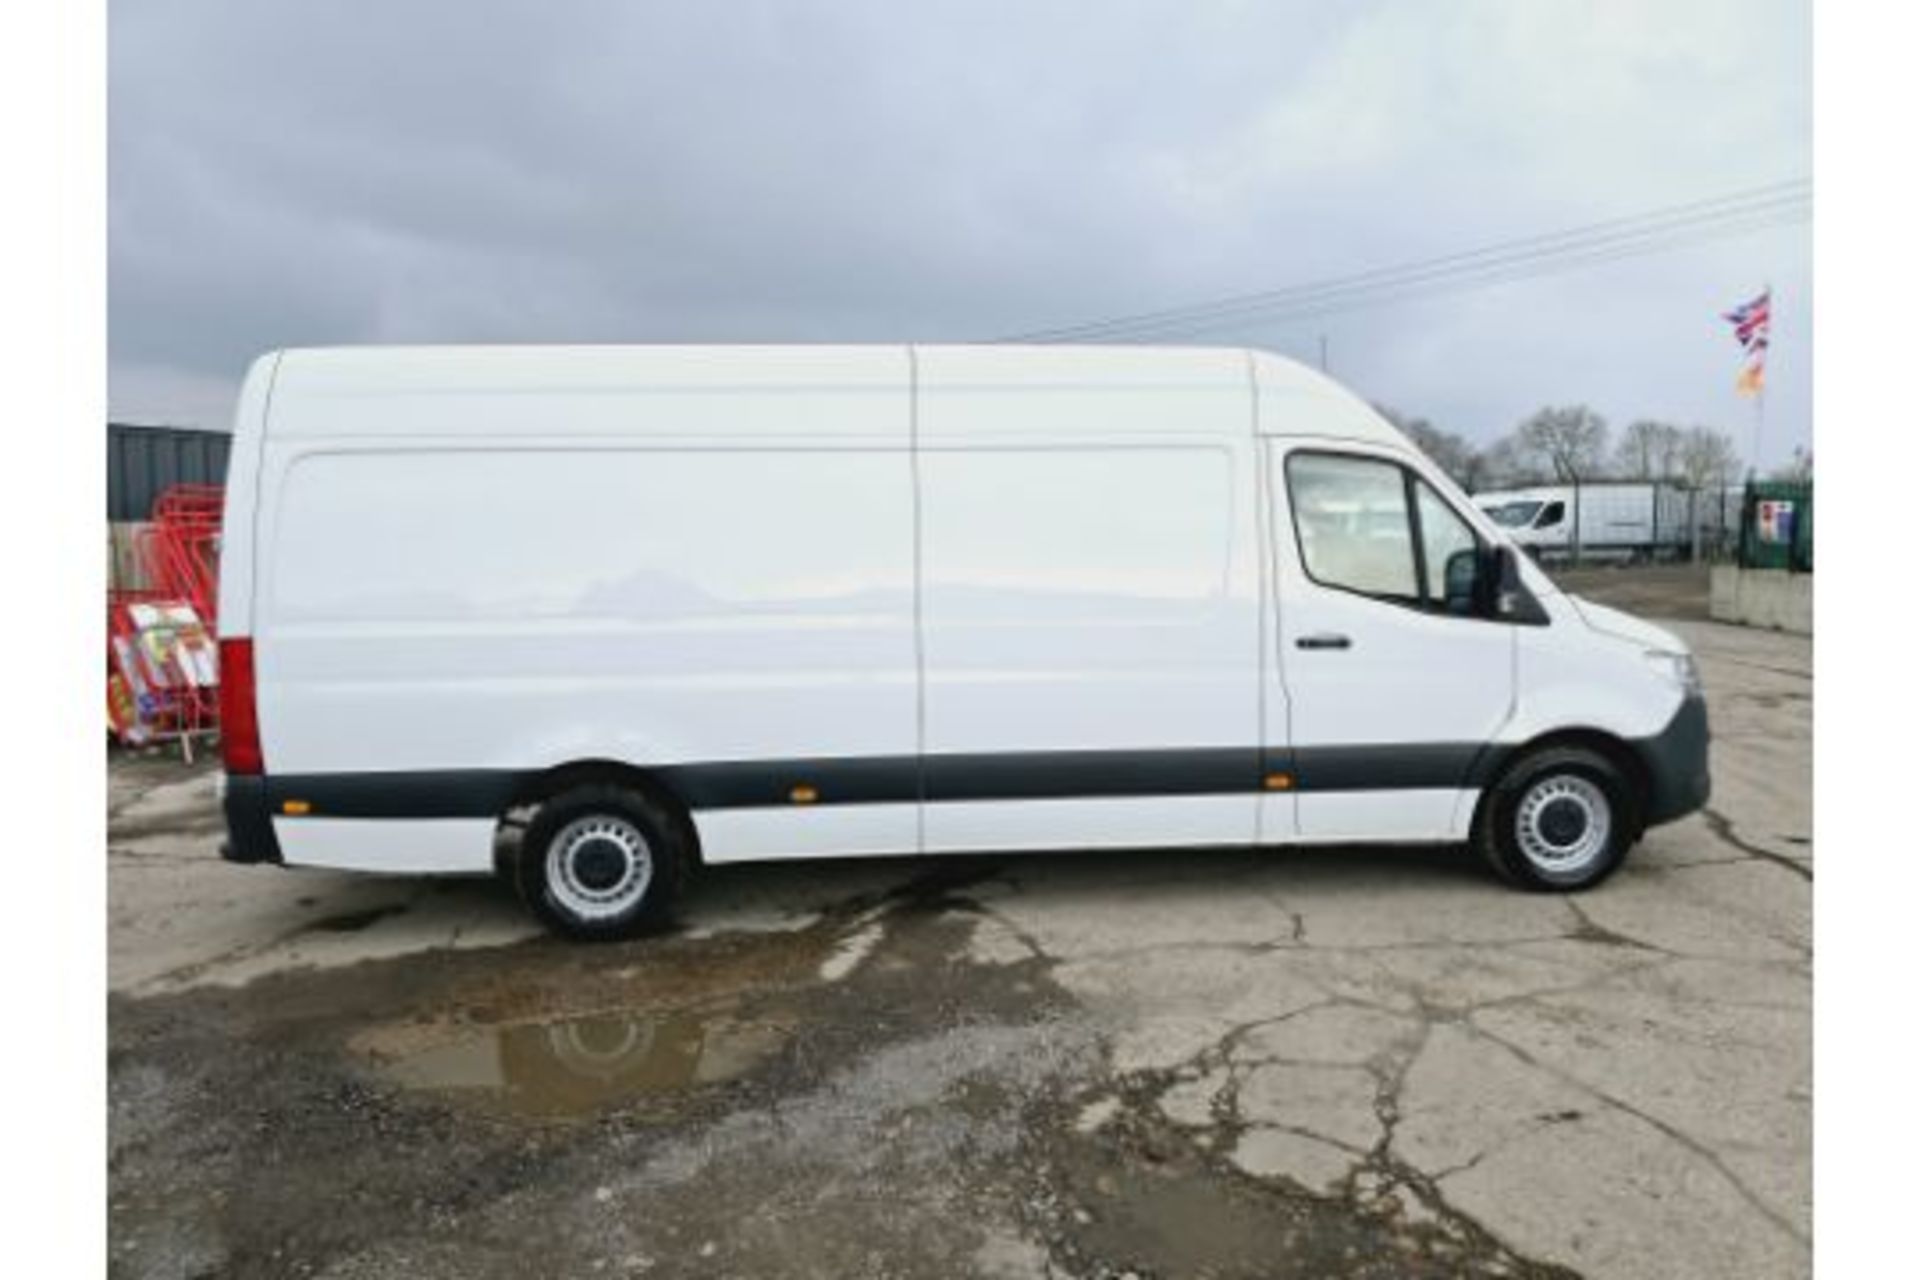 (RESERVE MET)MERCEDES SPRINTER 315CDI "LWB" HIGH TOP "70 REG" 2021 - 1 Owner From New - Euro 6 - Image 2 of 16